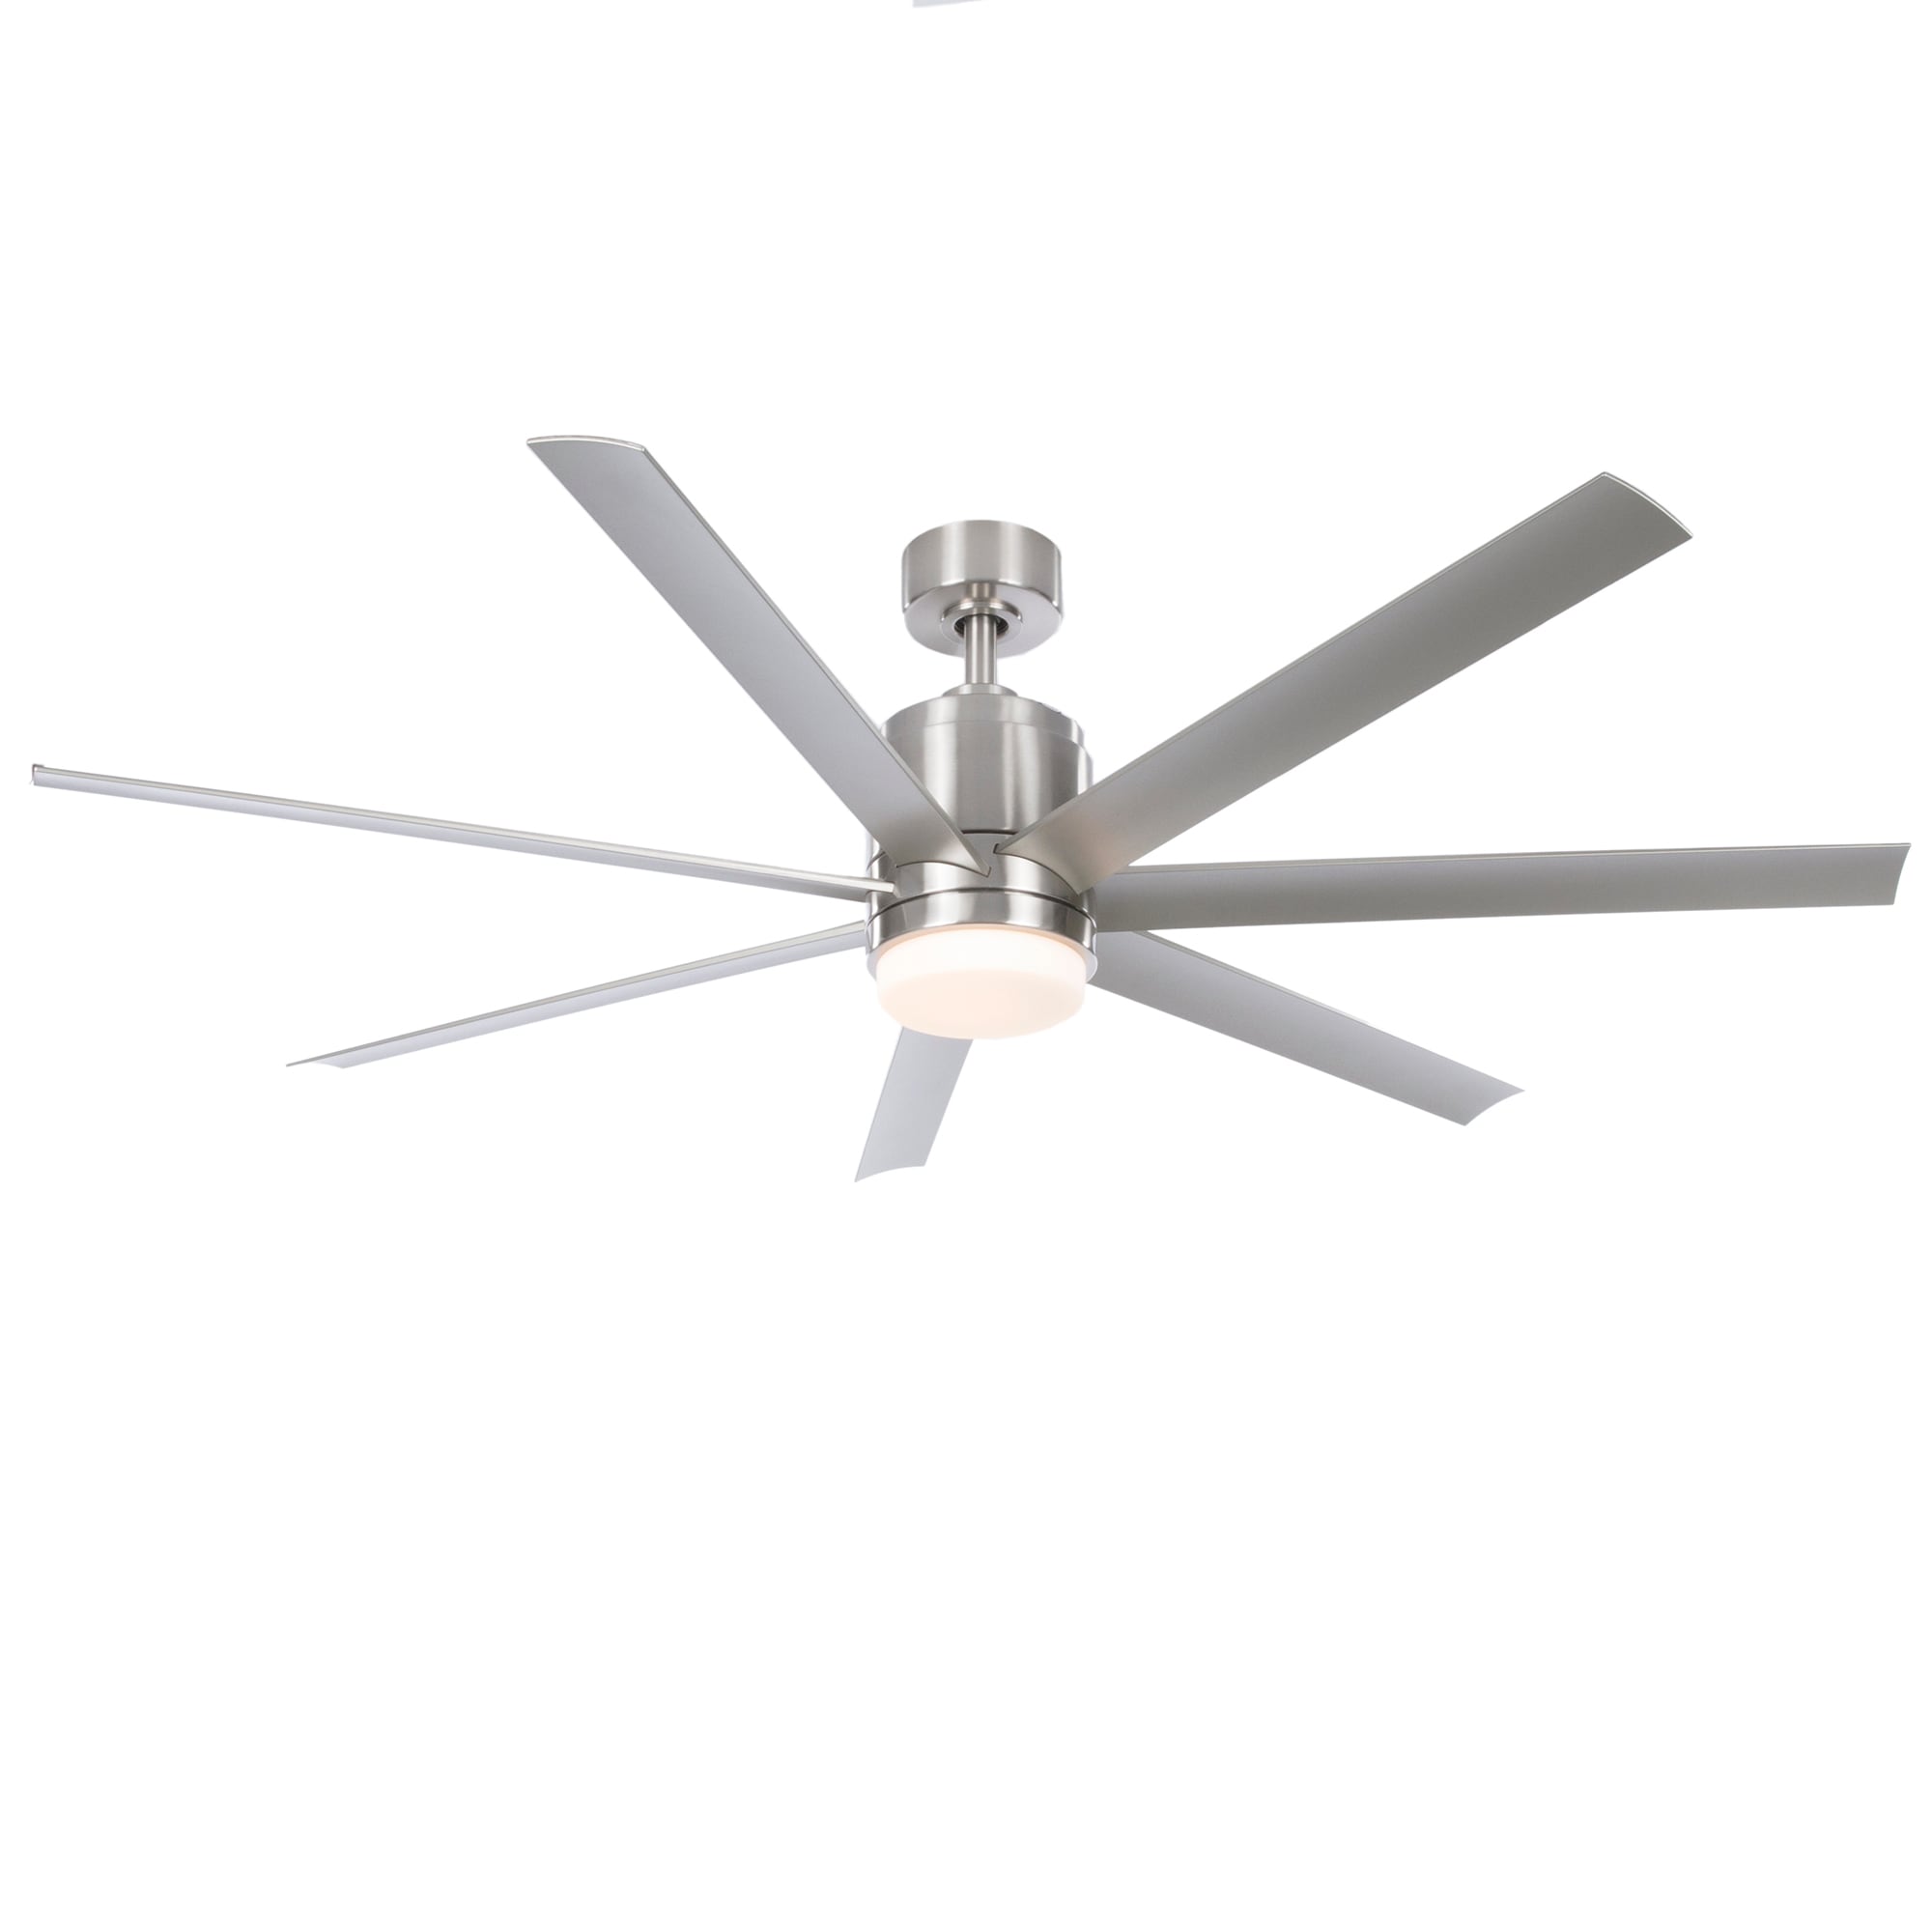 Details about   56 In Indoor/Outdoor Ceiling Fan With Wall Control 